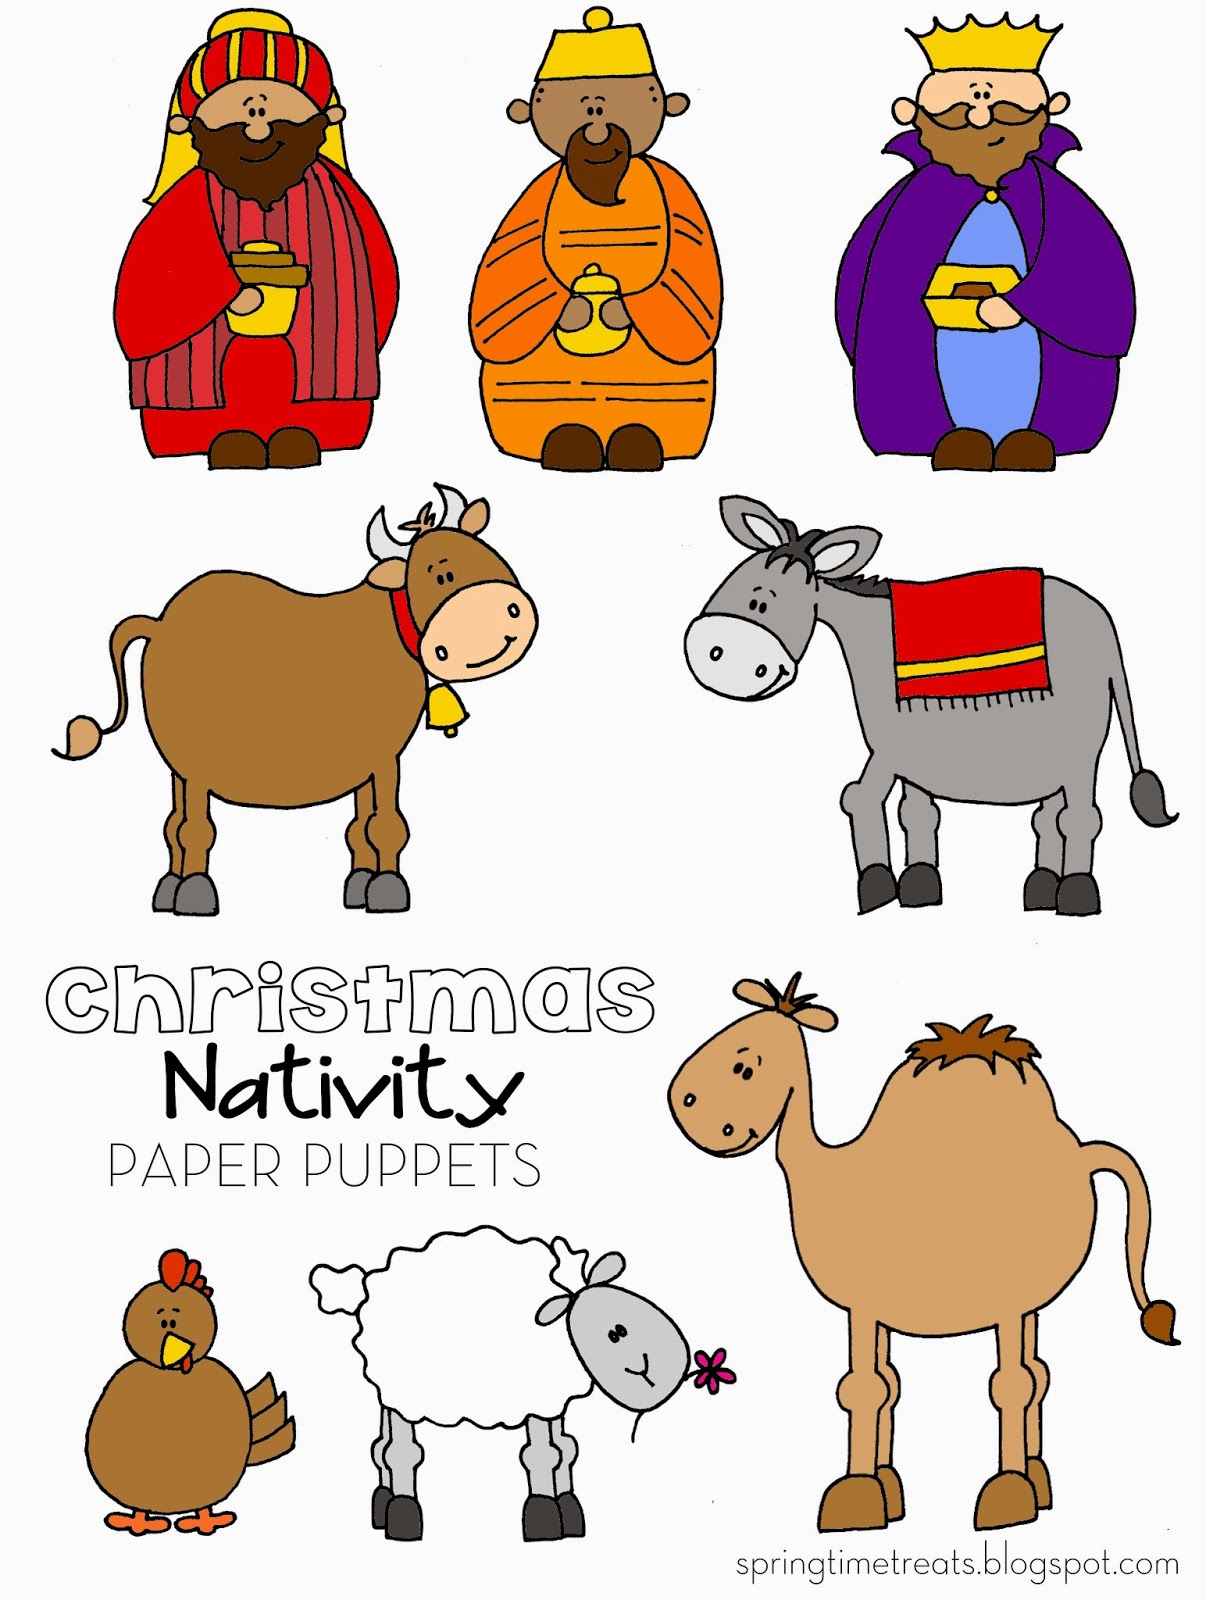 spring-time-treats-nativity-paper-puppets-free-printables